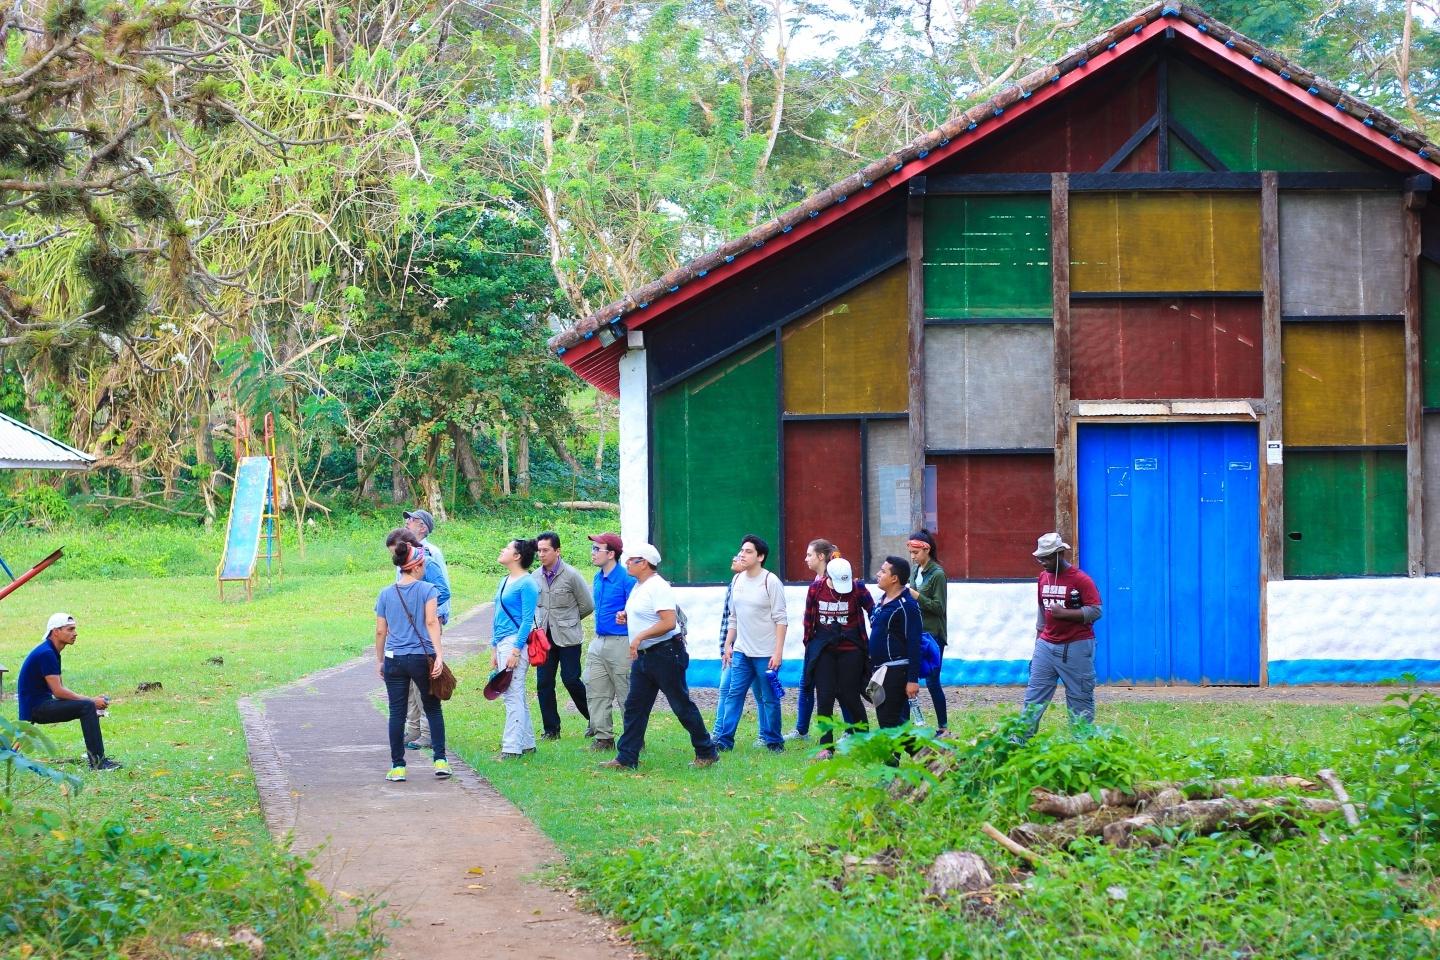 Group of students experiencing a new culture and a colorful building